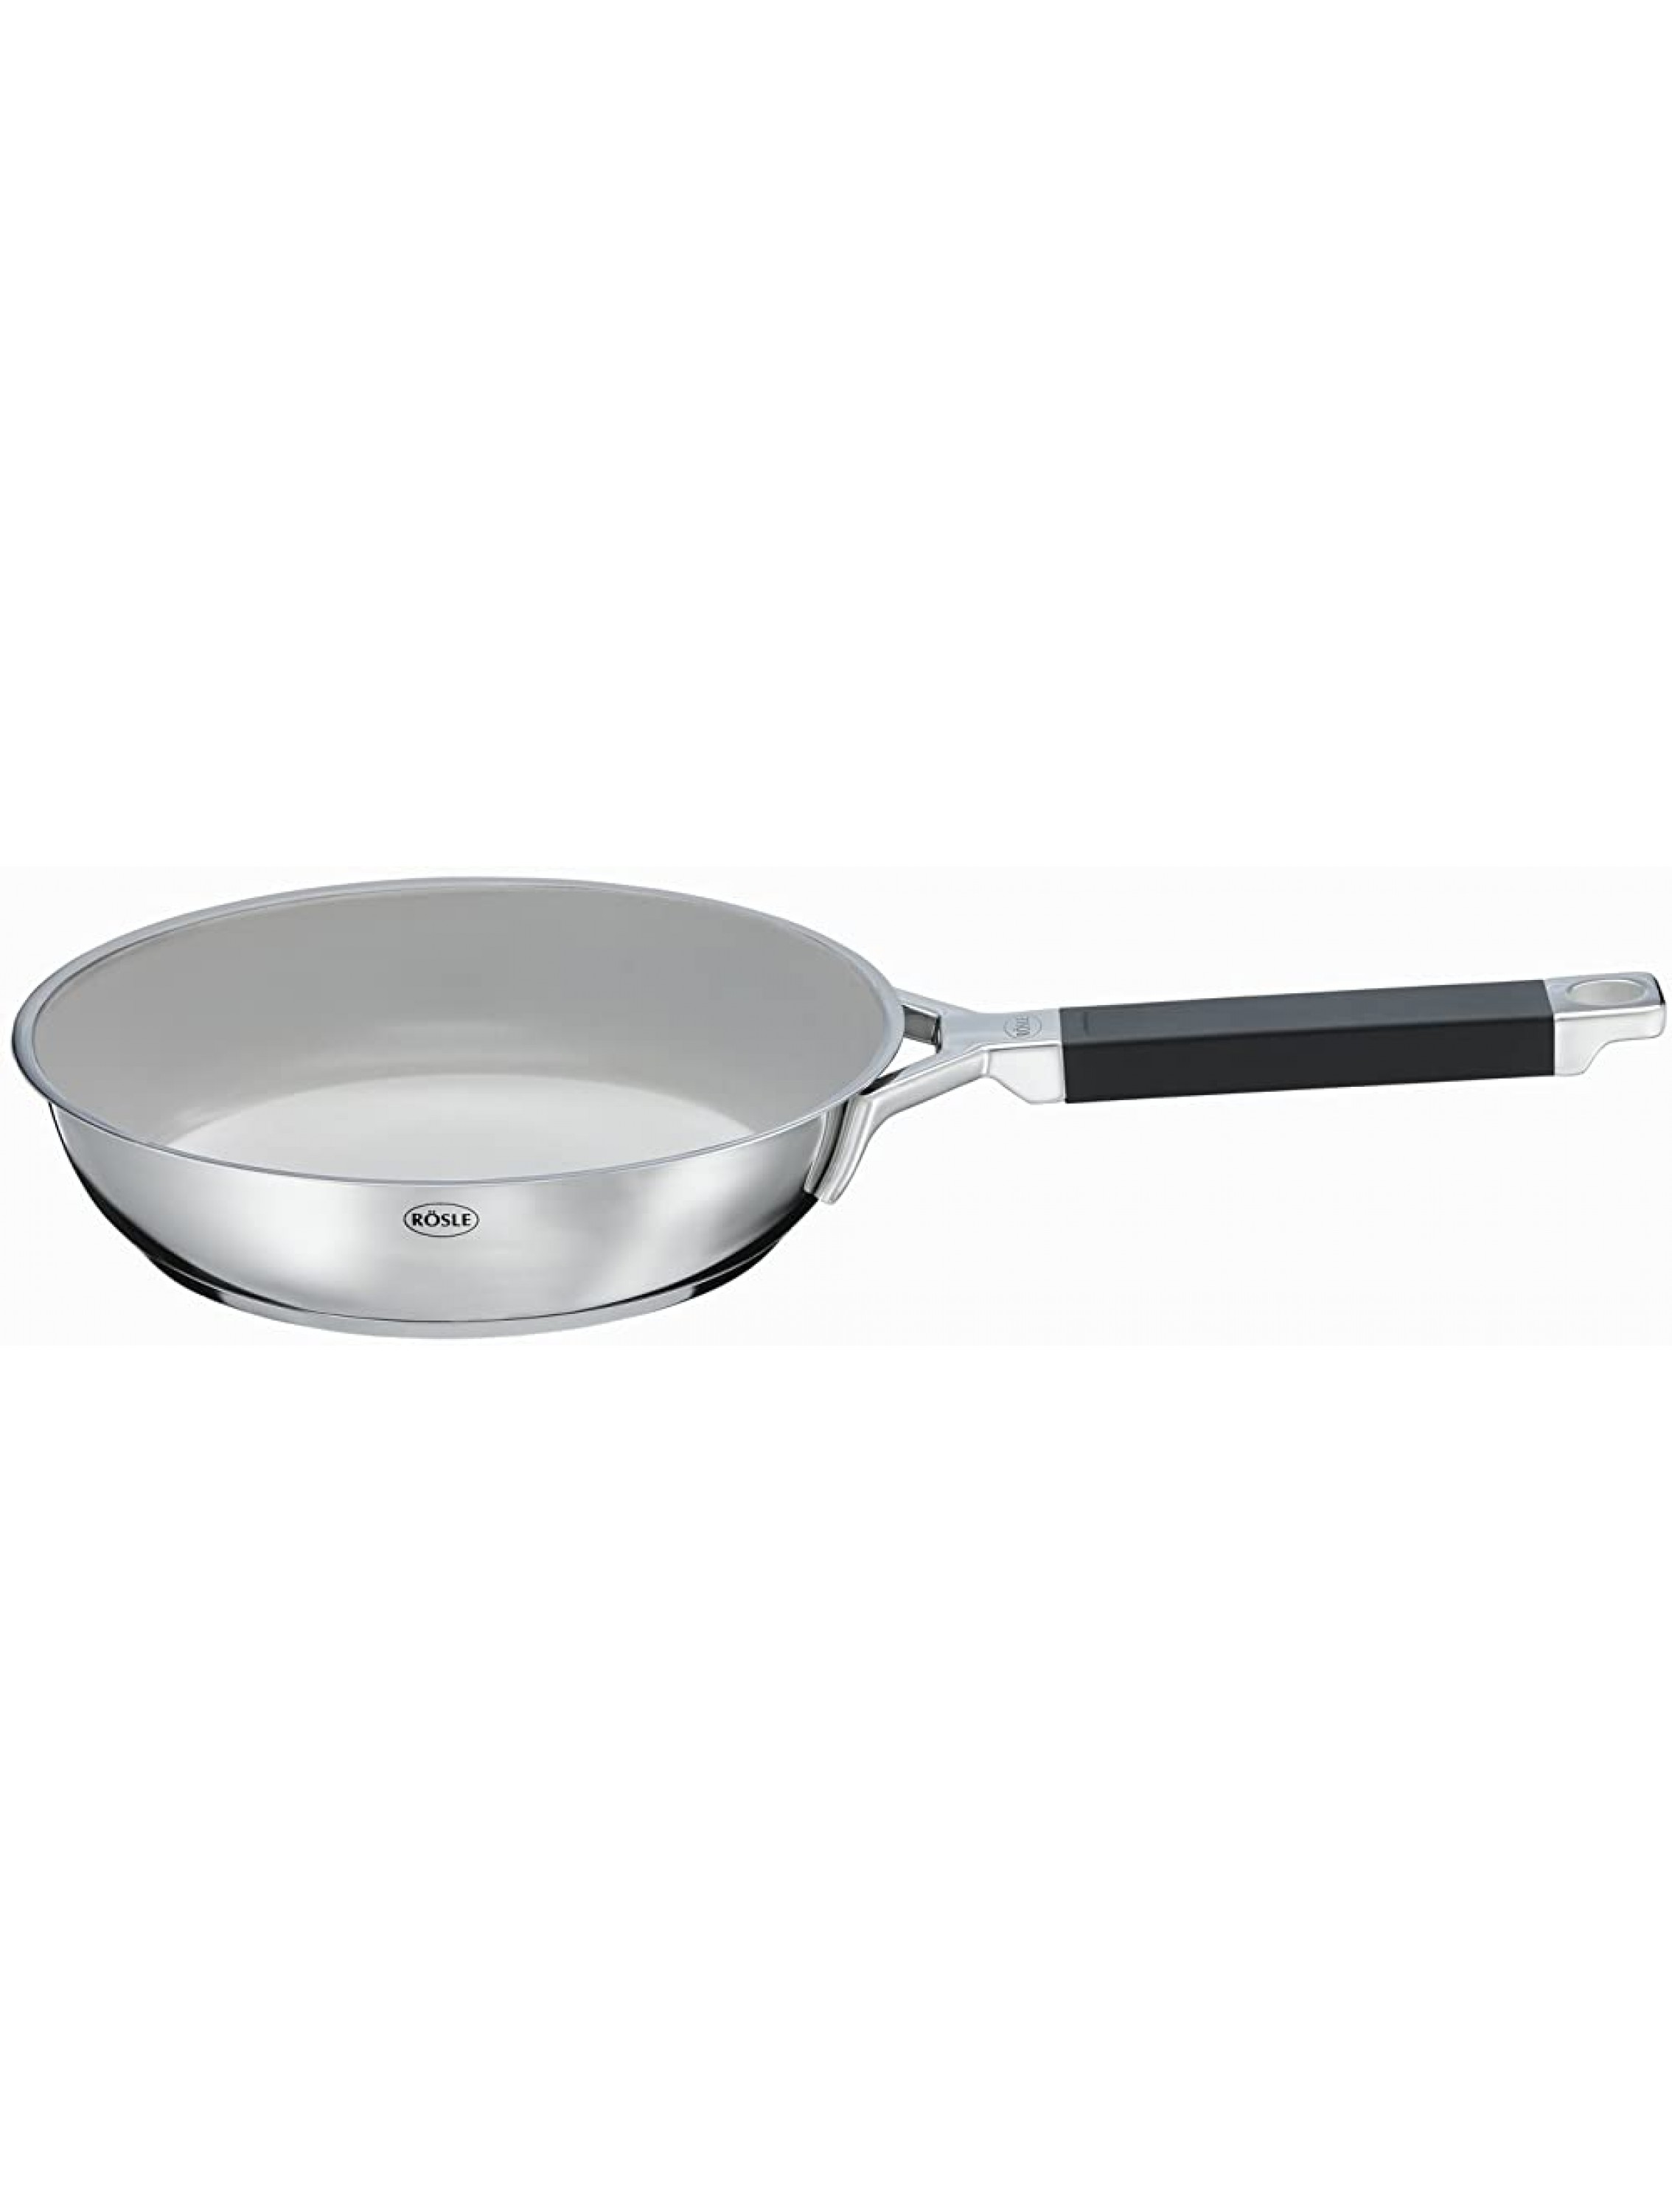 Rösle Silence Stainless Steel with Aluminum Core Cookware Chef Pan with Silicone Handle 9-inch - BMAJFL8LF